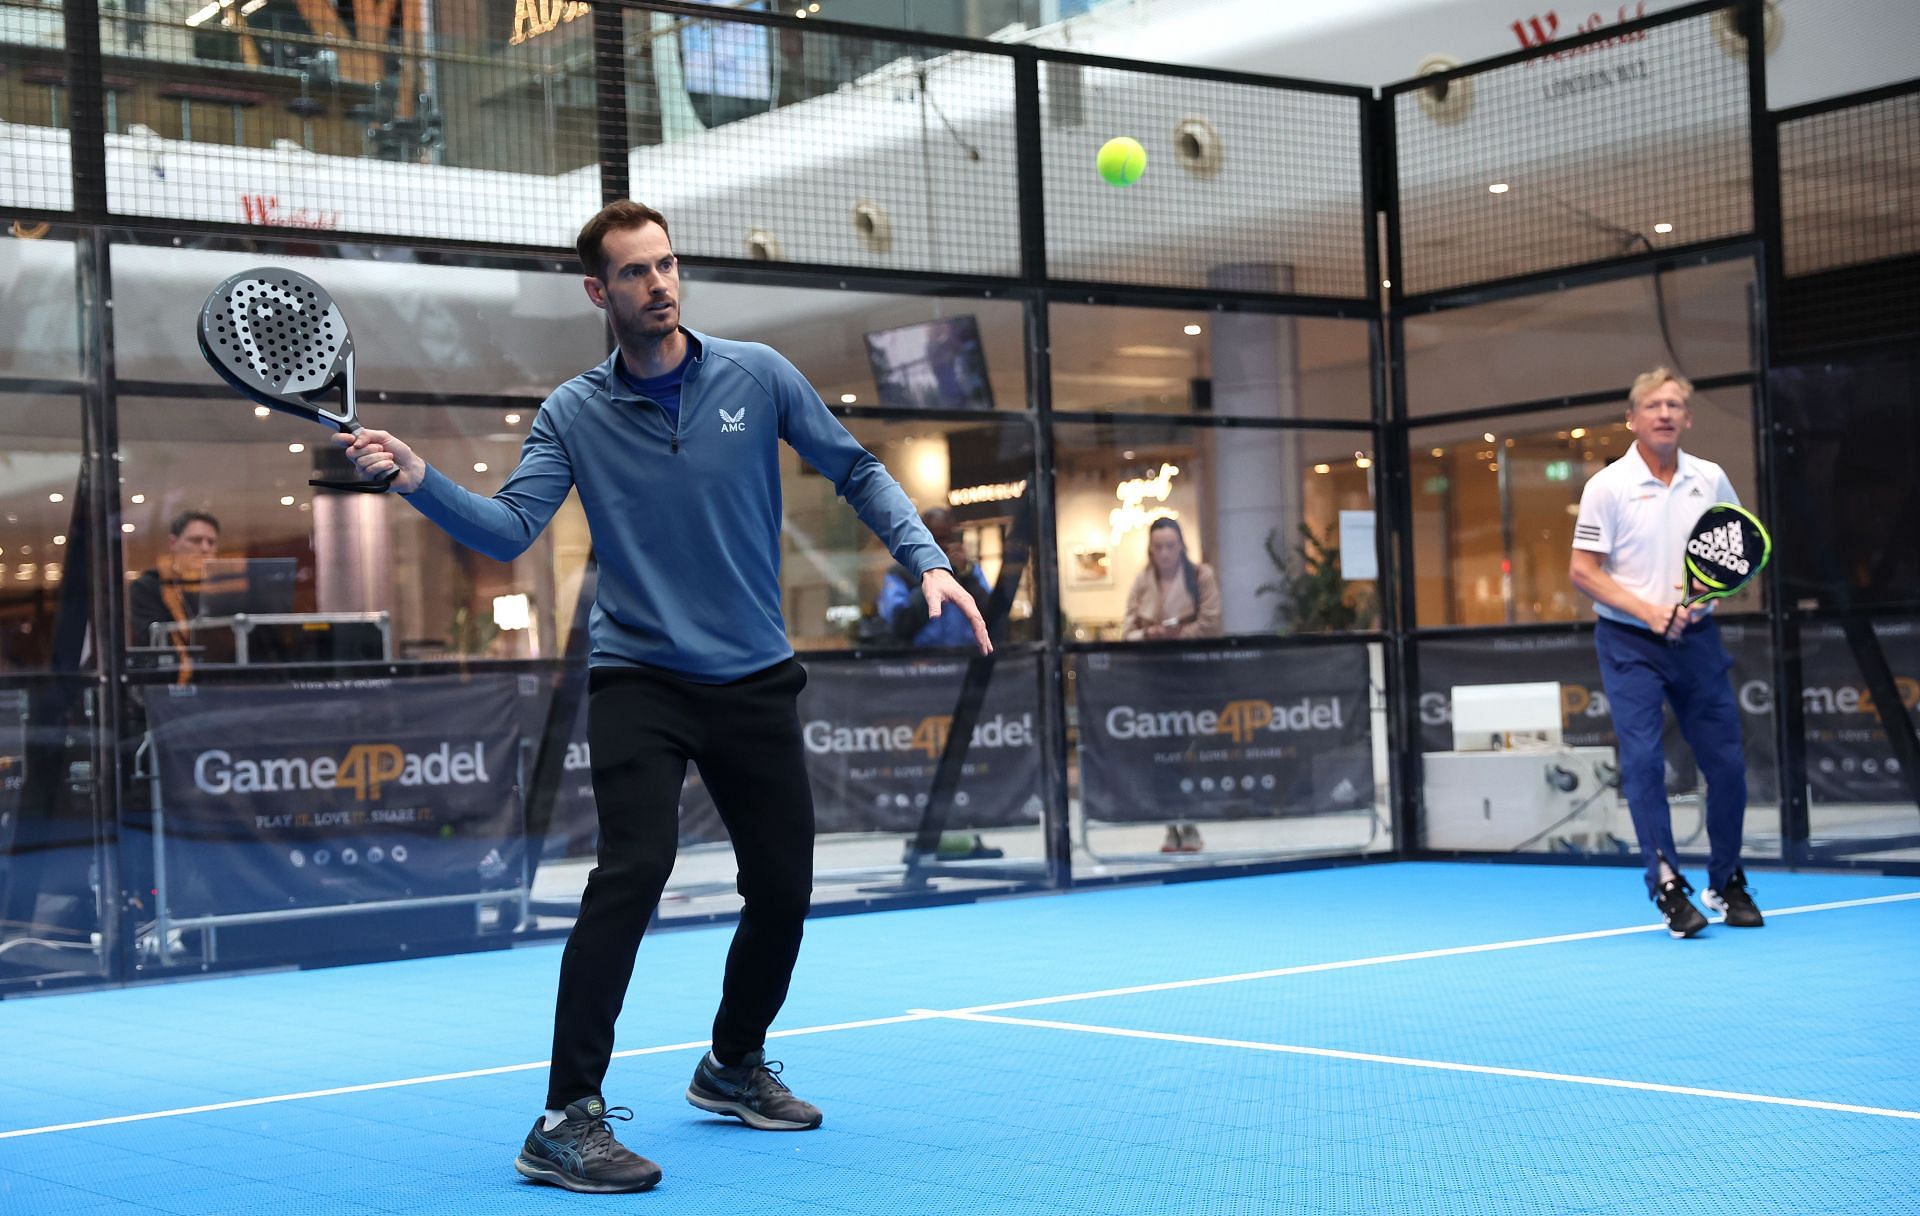 Andy Murray at the Game4Padel Westfield London Pop-Up